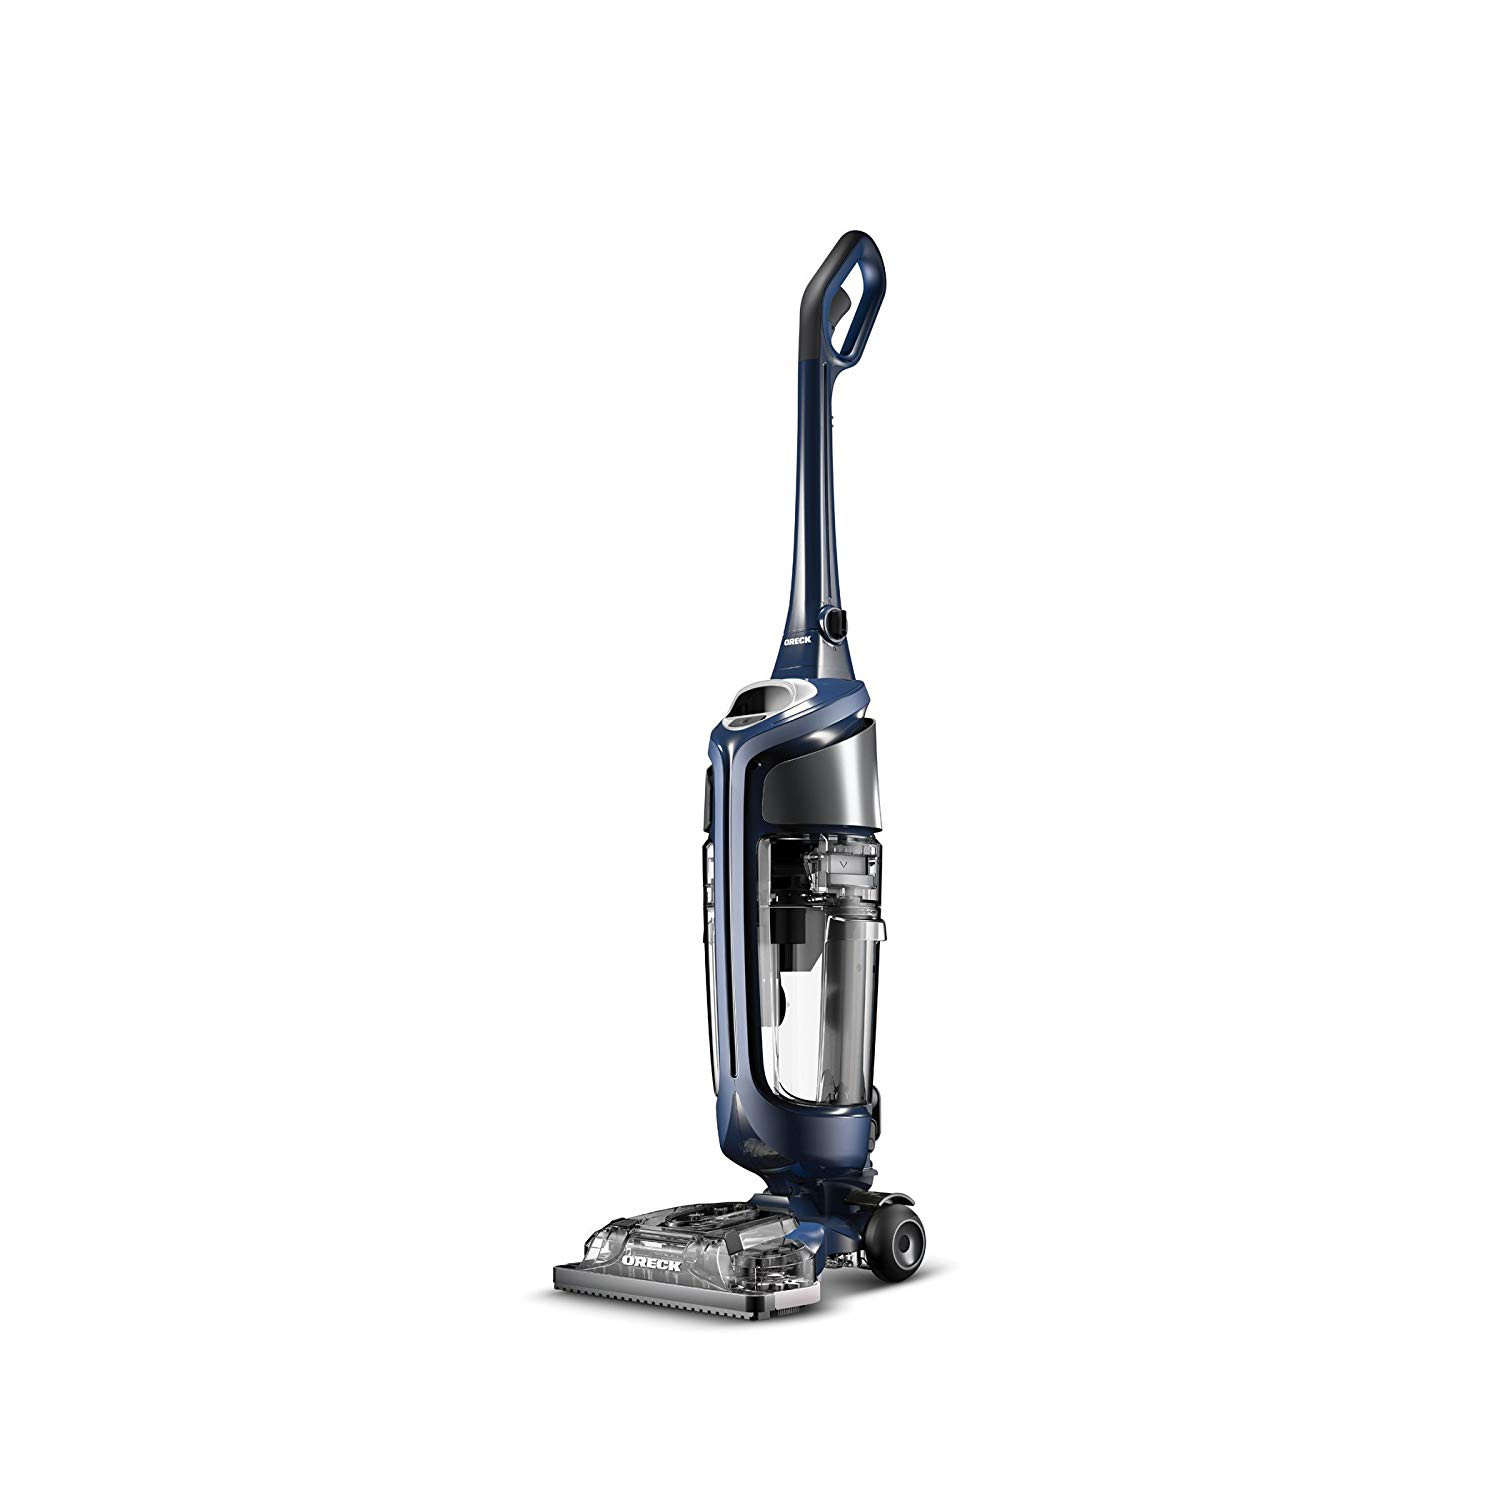 12 Lovable Hardwood Floor Vacuum and Steam Cleaner Reviews 2024 free download hardwood floor vacuum and steam cleaner reviews of amazon com oreck surface scrub hard floor cleaner corded home with regard to amazon com oreck surface scrub hard floor cleaner corded home 